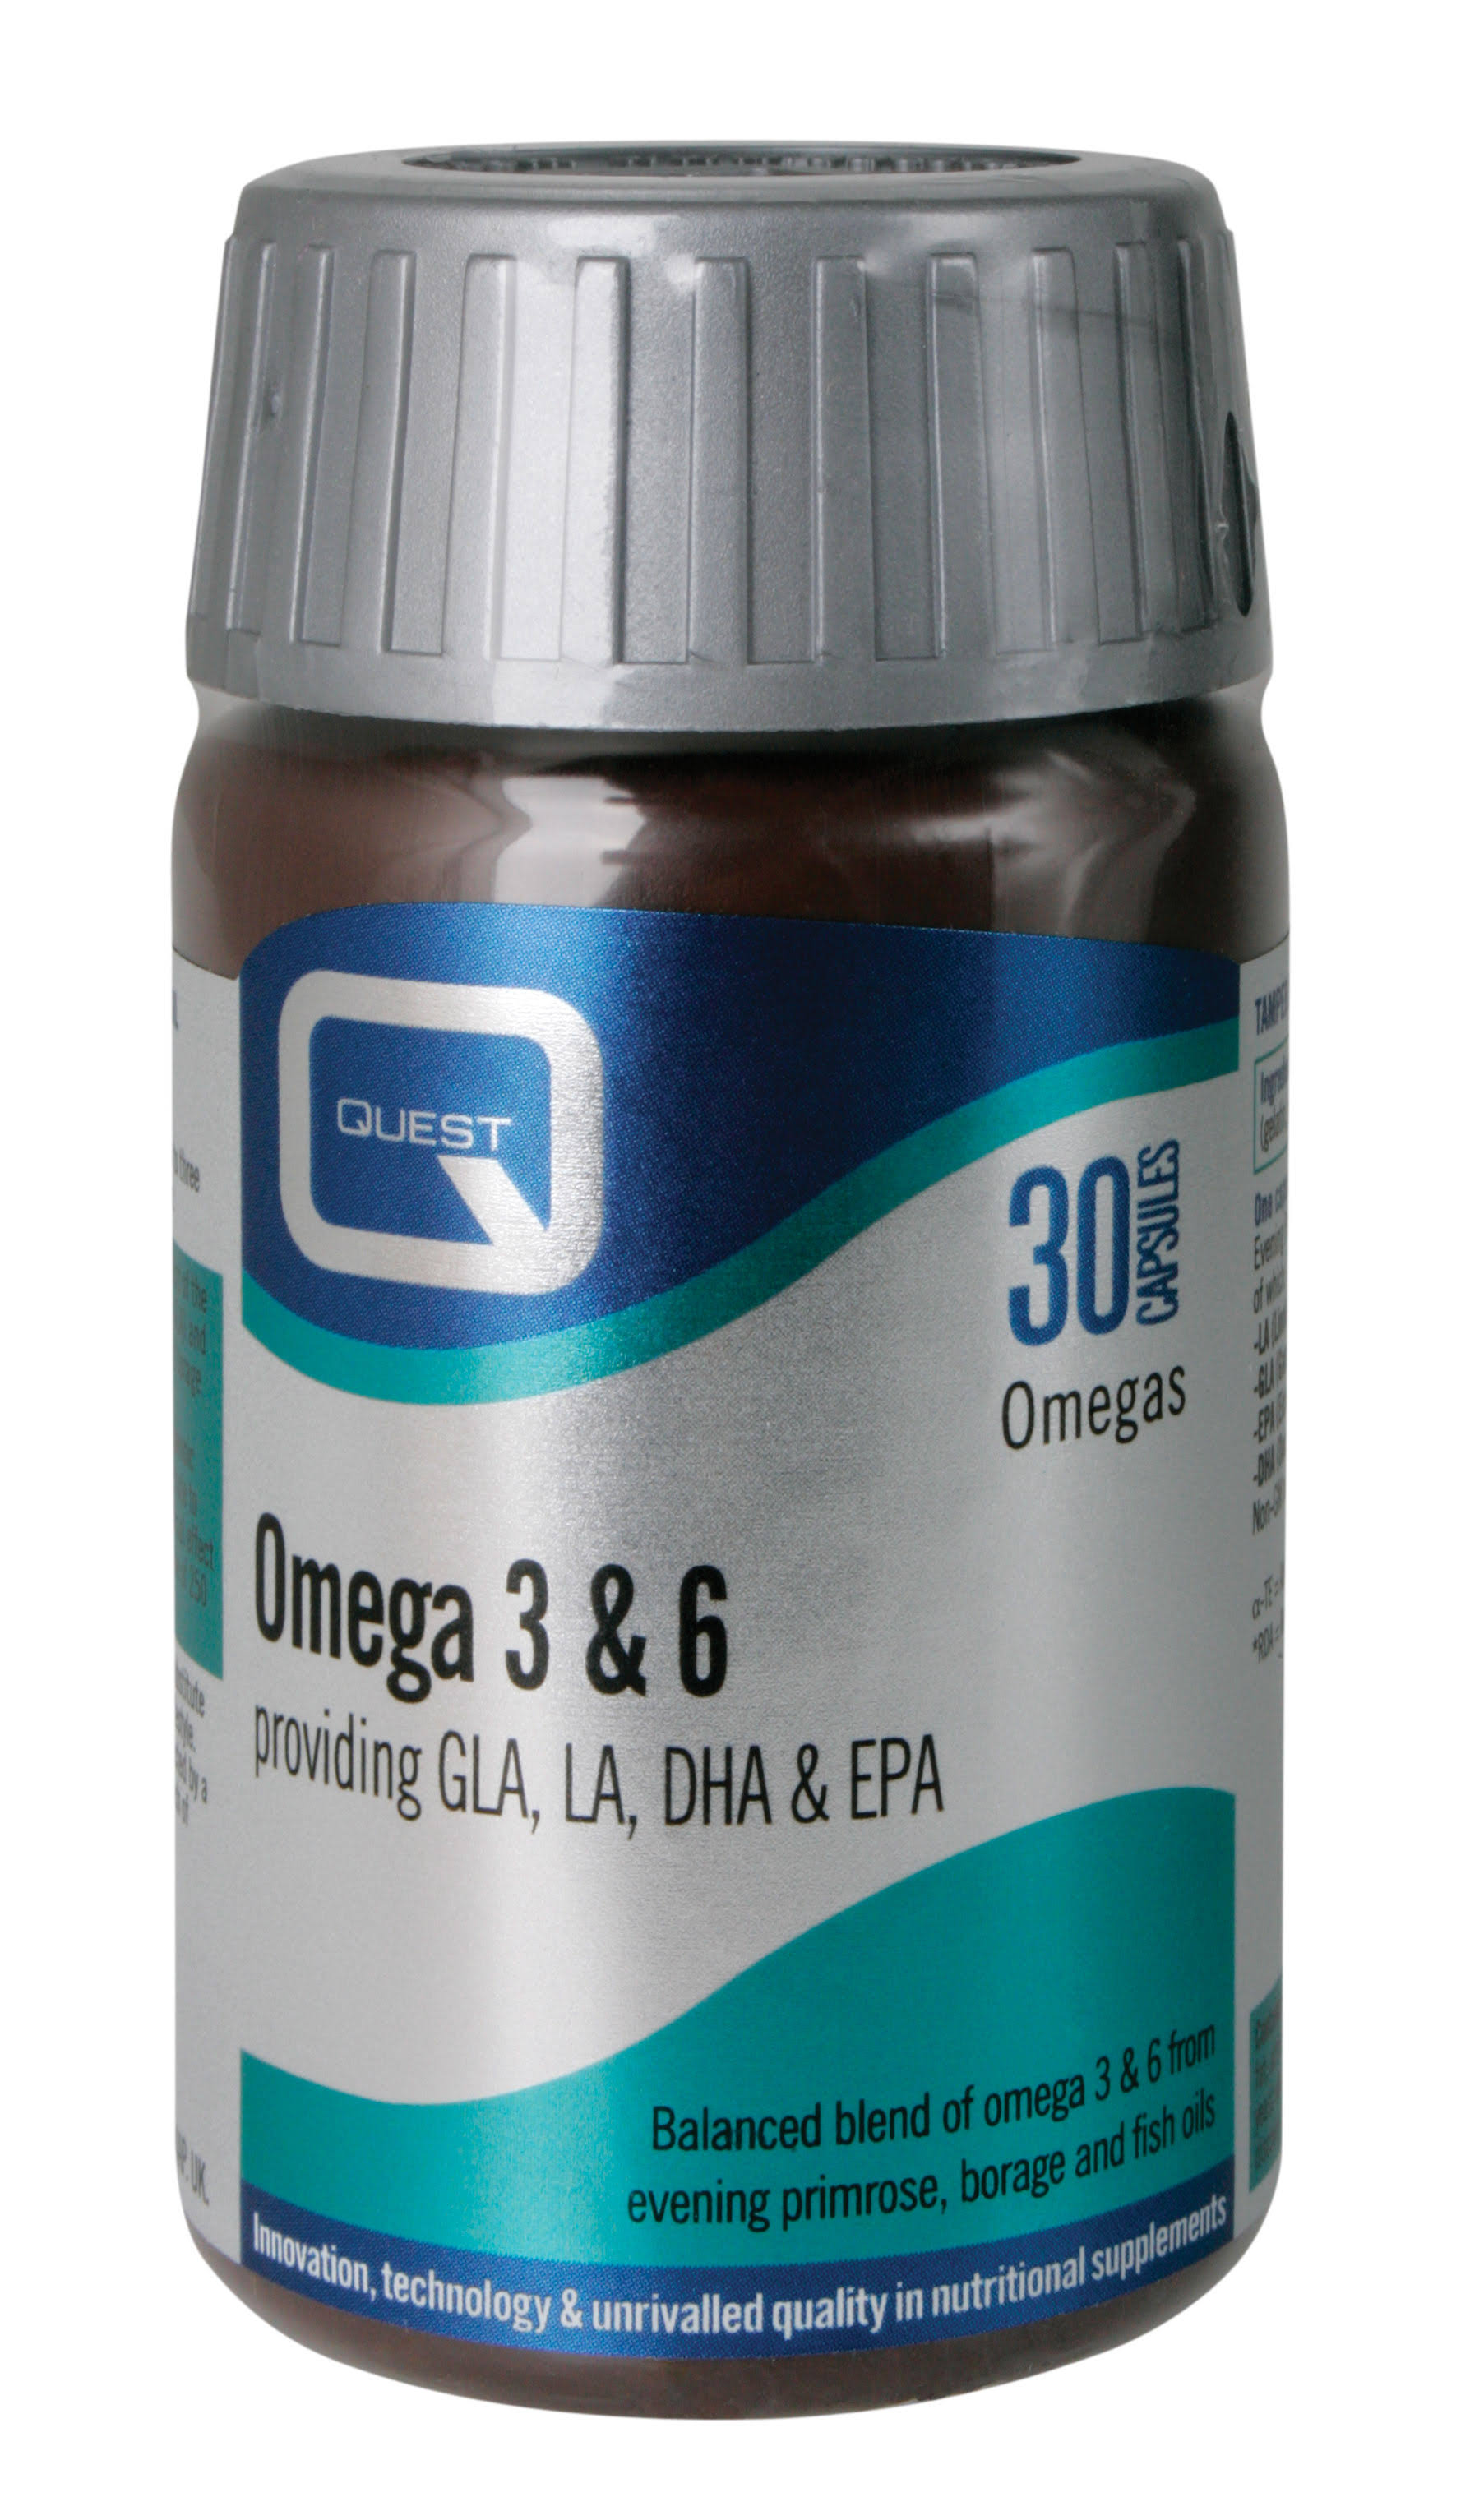 Quest Well-Being Cardio Formula Omega 3 & 6 - 30 Capsules